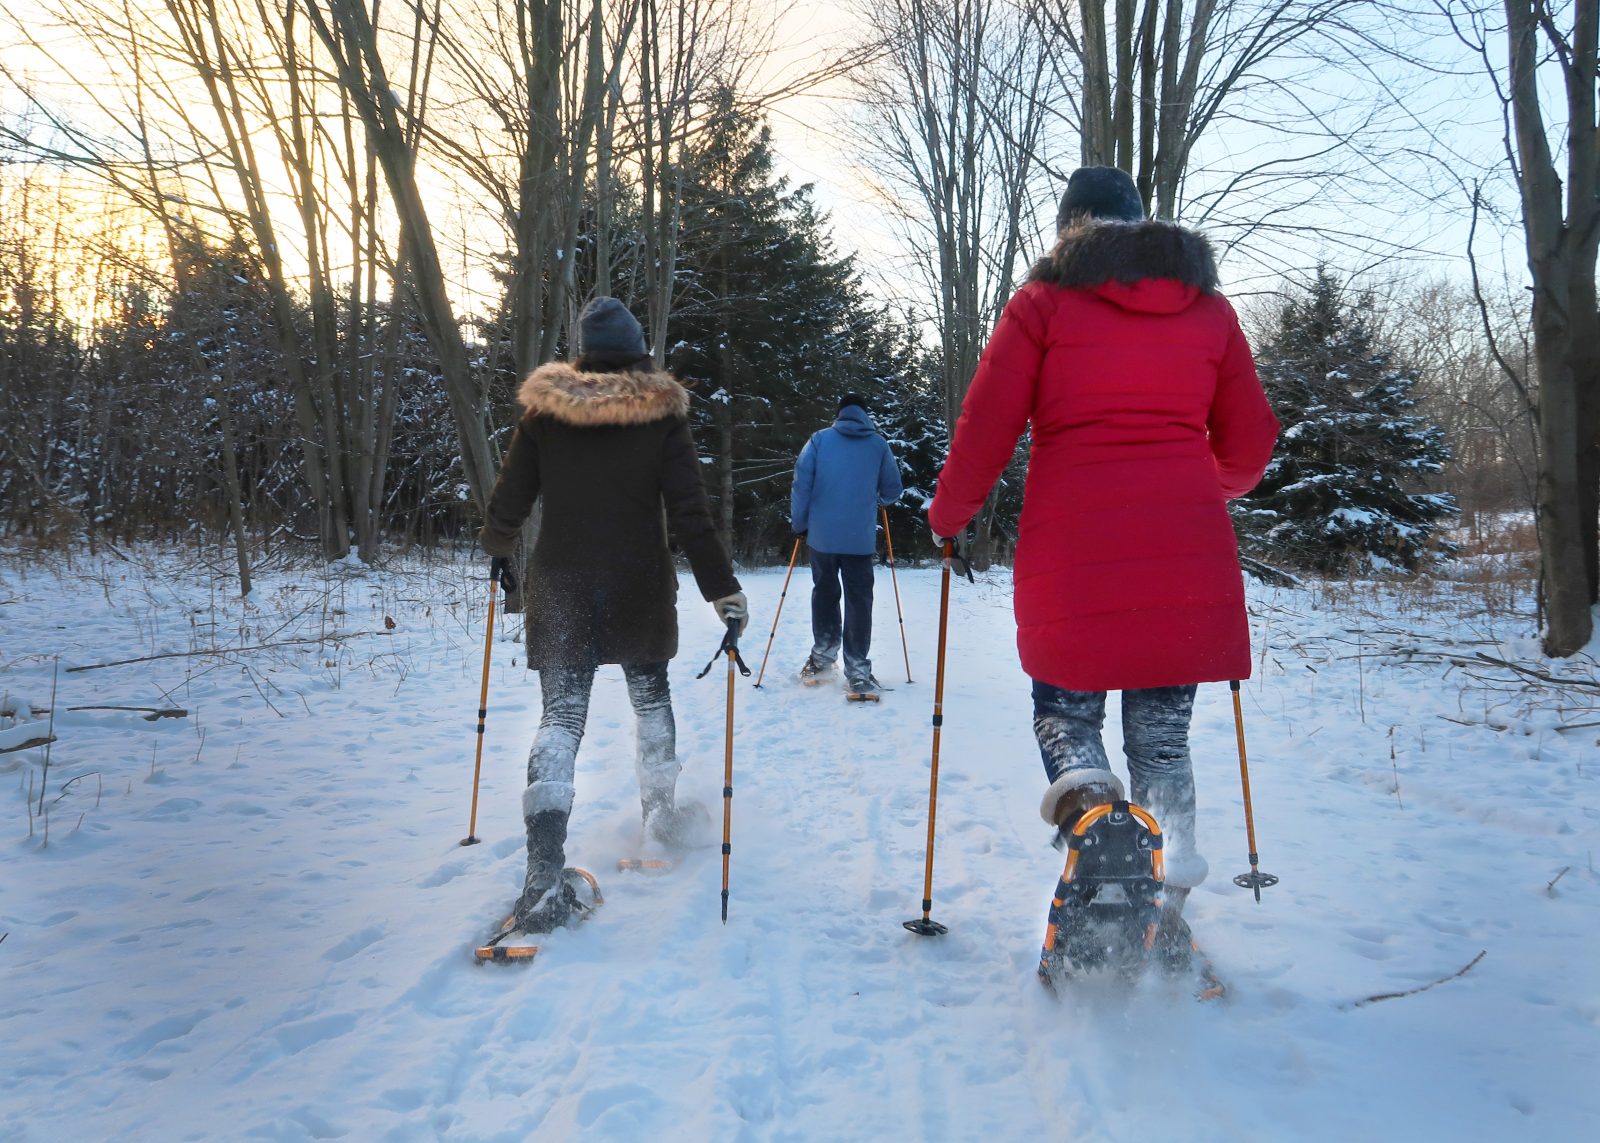 Step Into Nature This Winter at RRCA’s 3 Conservation Areas